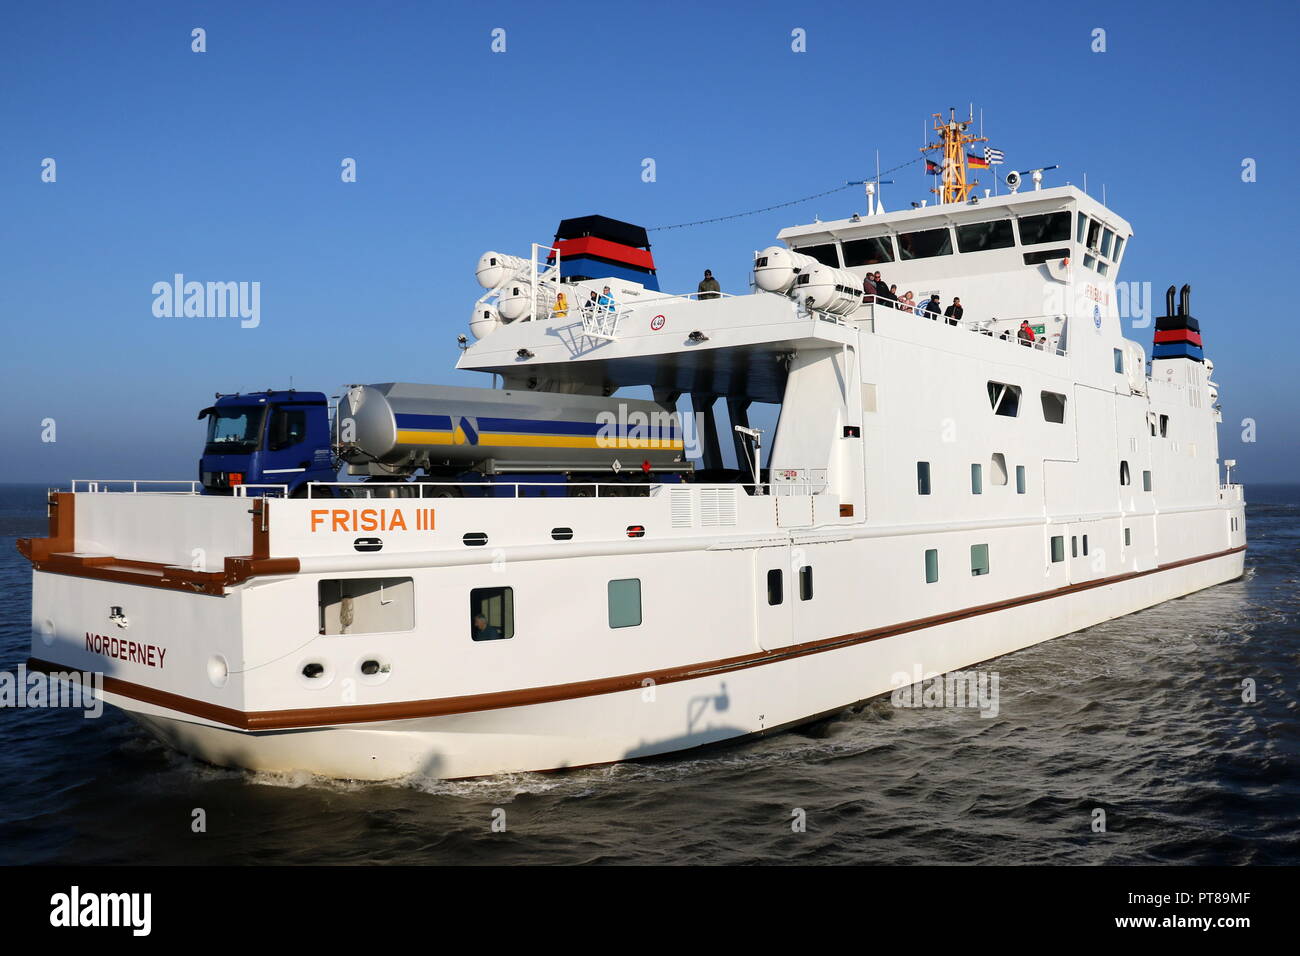 The car ferry Frisia III on September 27, 2018 on the route from Norderney  to Norddeich on the North Sea Stock Photo - Alamy